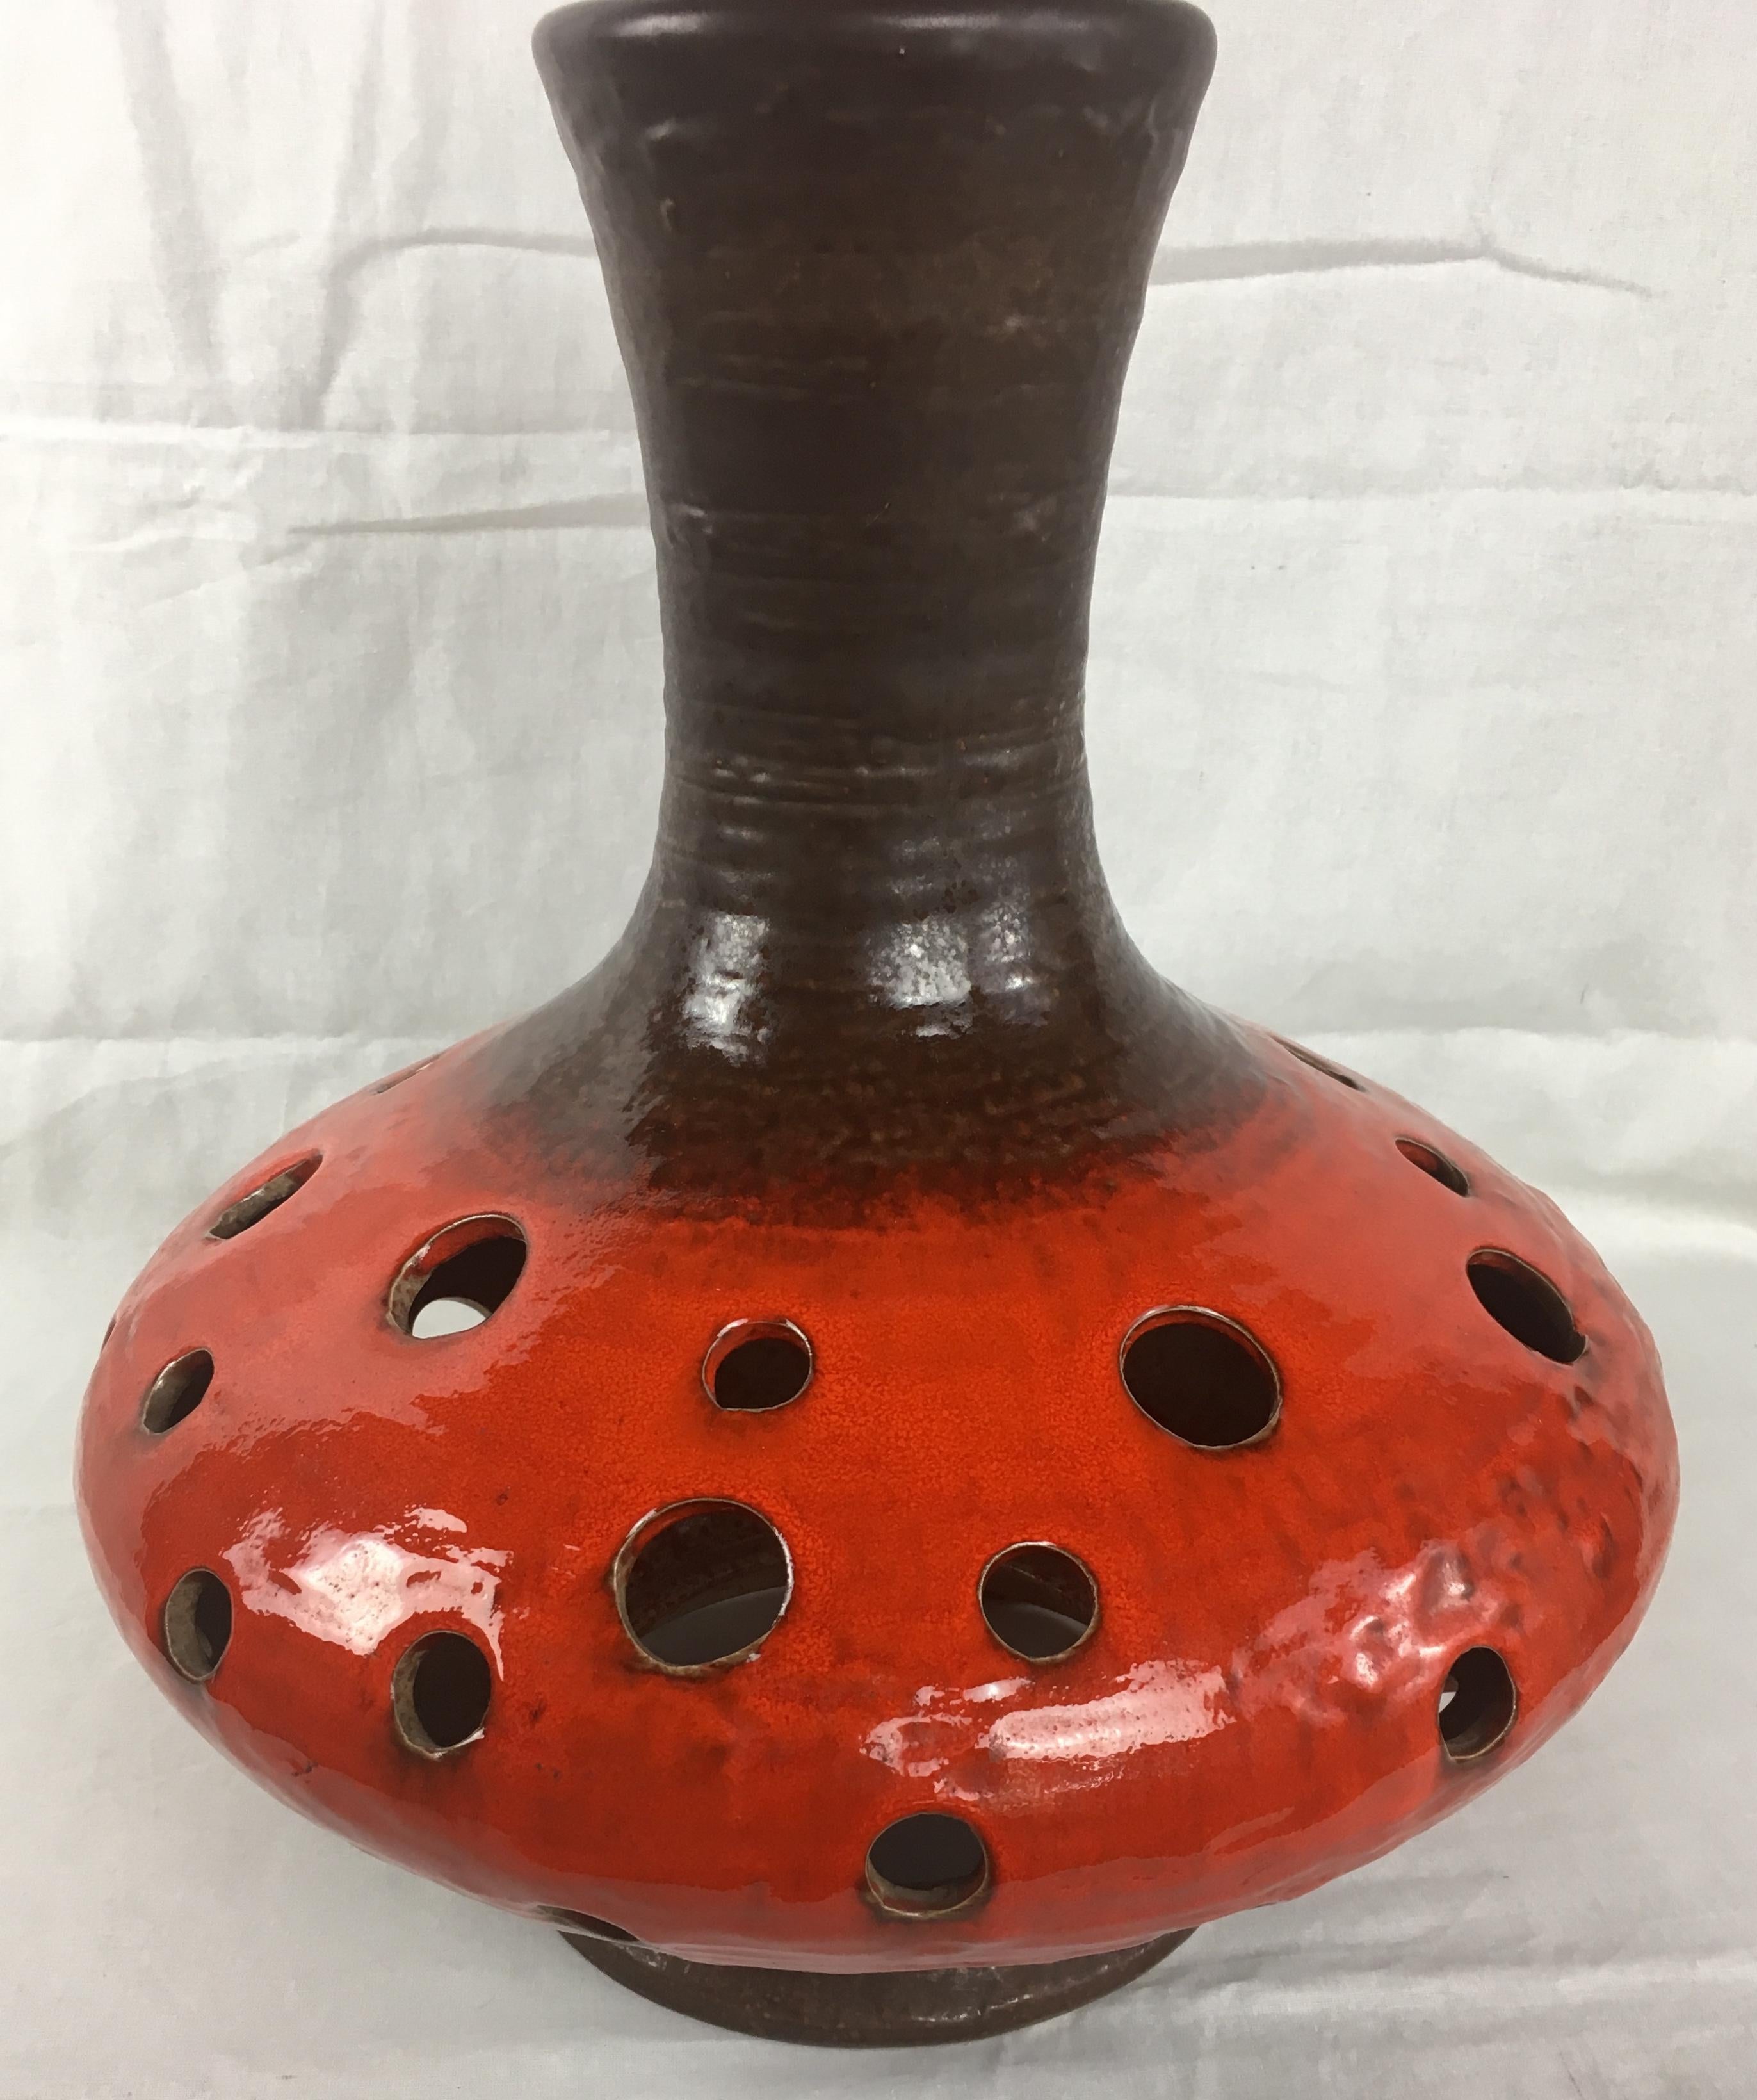 Very decorative and large midcentury table lamp attributed to Georges Pelletier, France made from ceramics and finished in eye-catching burnt orange and brown hues.

The multicolored base combined with a new shade has many attractive details. The